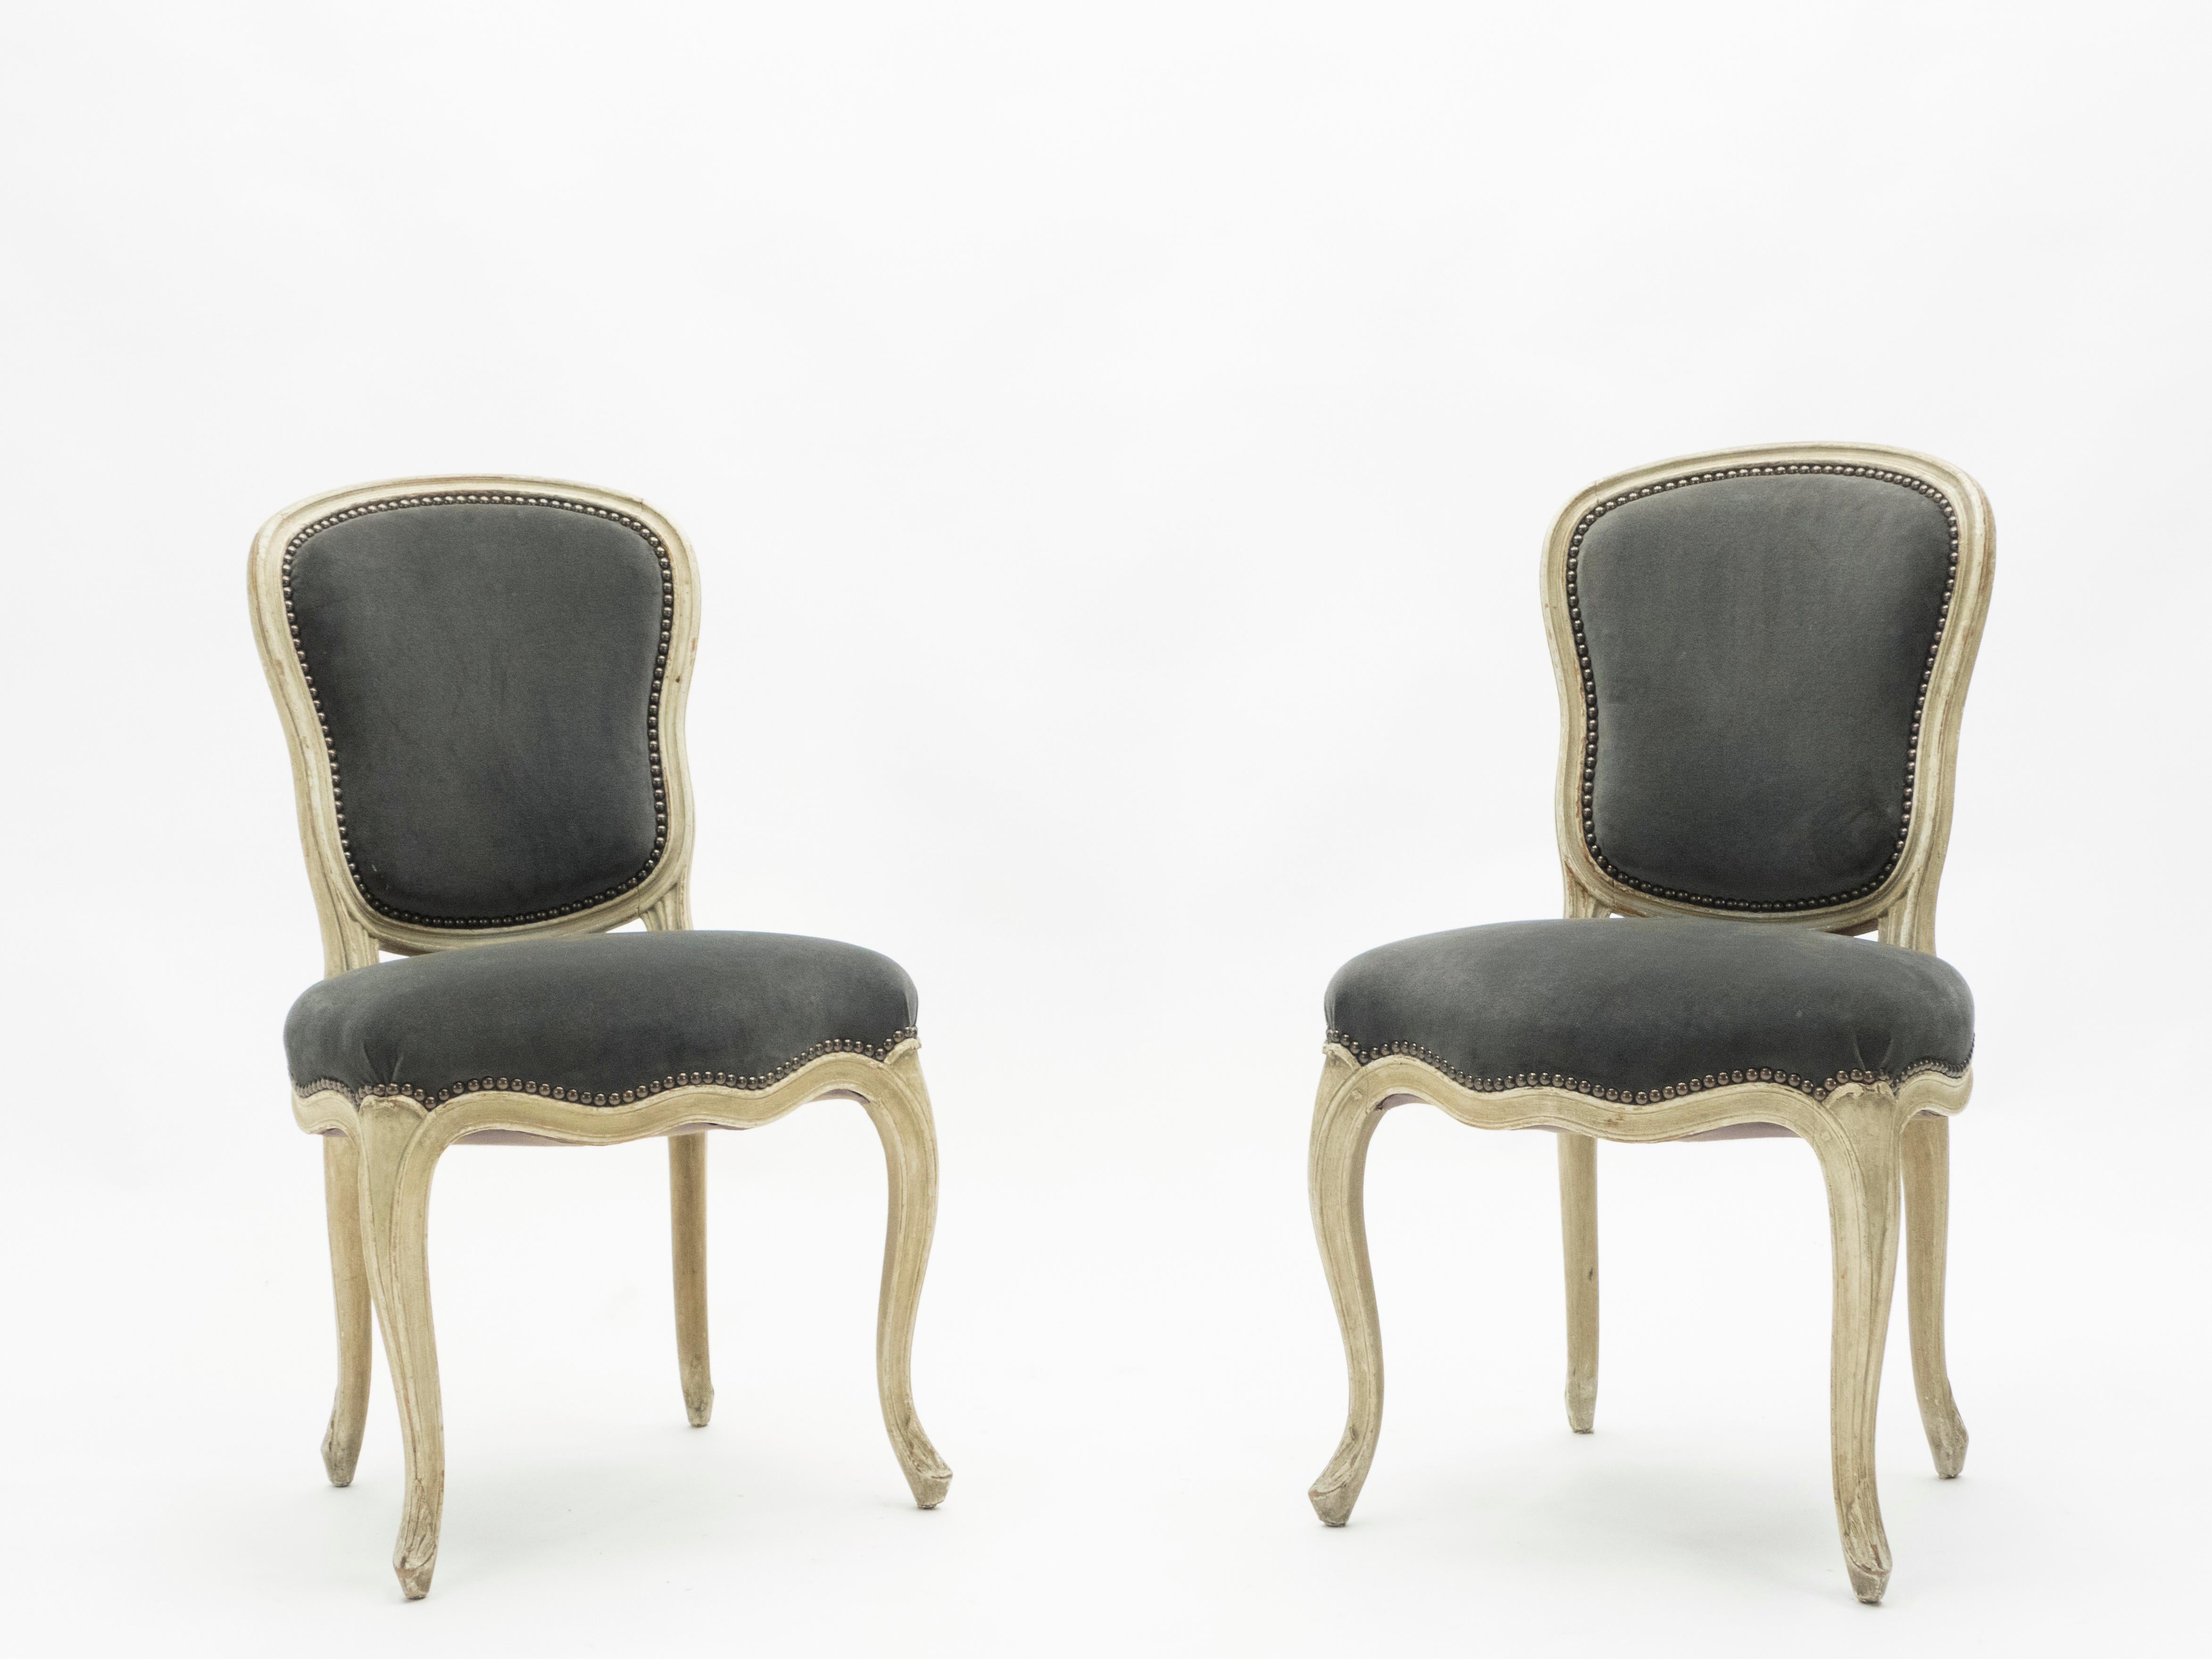 Mid-20th Century Rare Pair of Stamped Maison Jansen Louis XV Neoclassical Chairs, 1940s For Sale